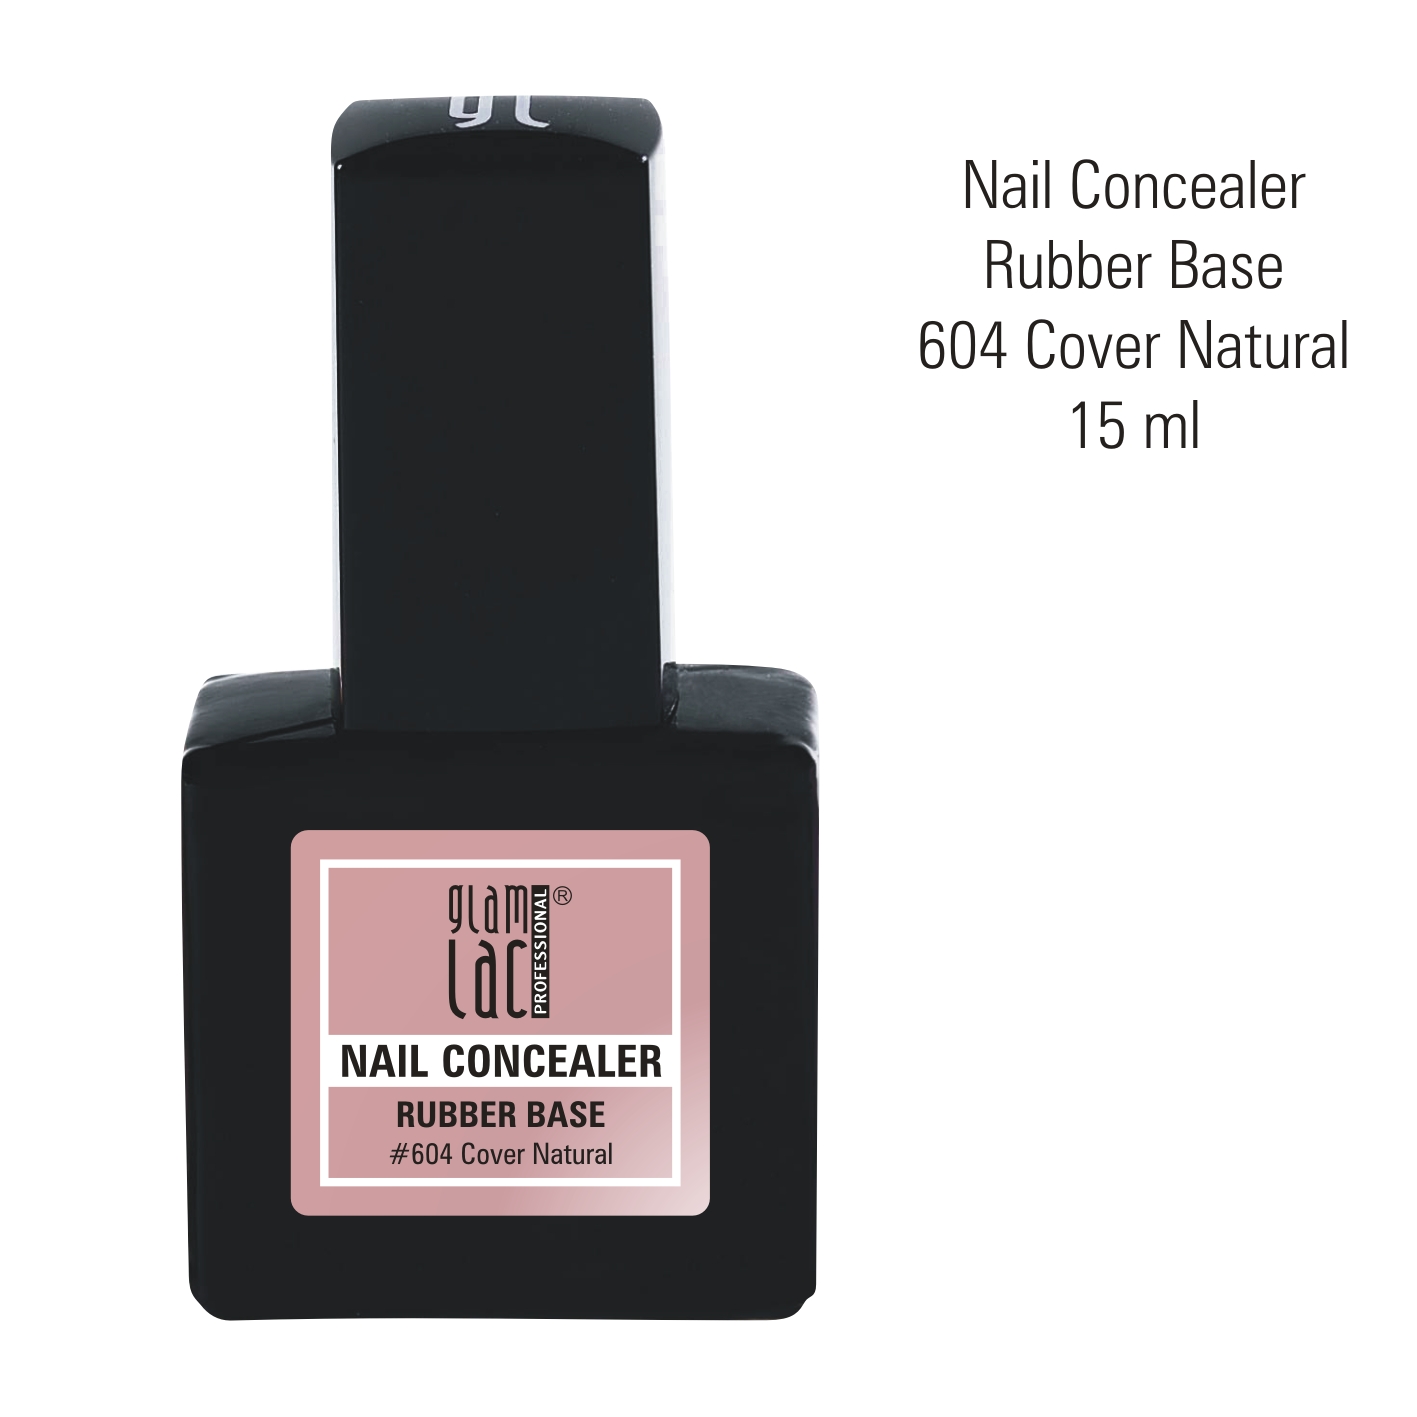 Rubber base "604 Cover Natural", 15 ml